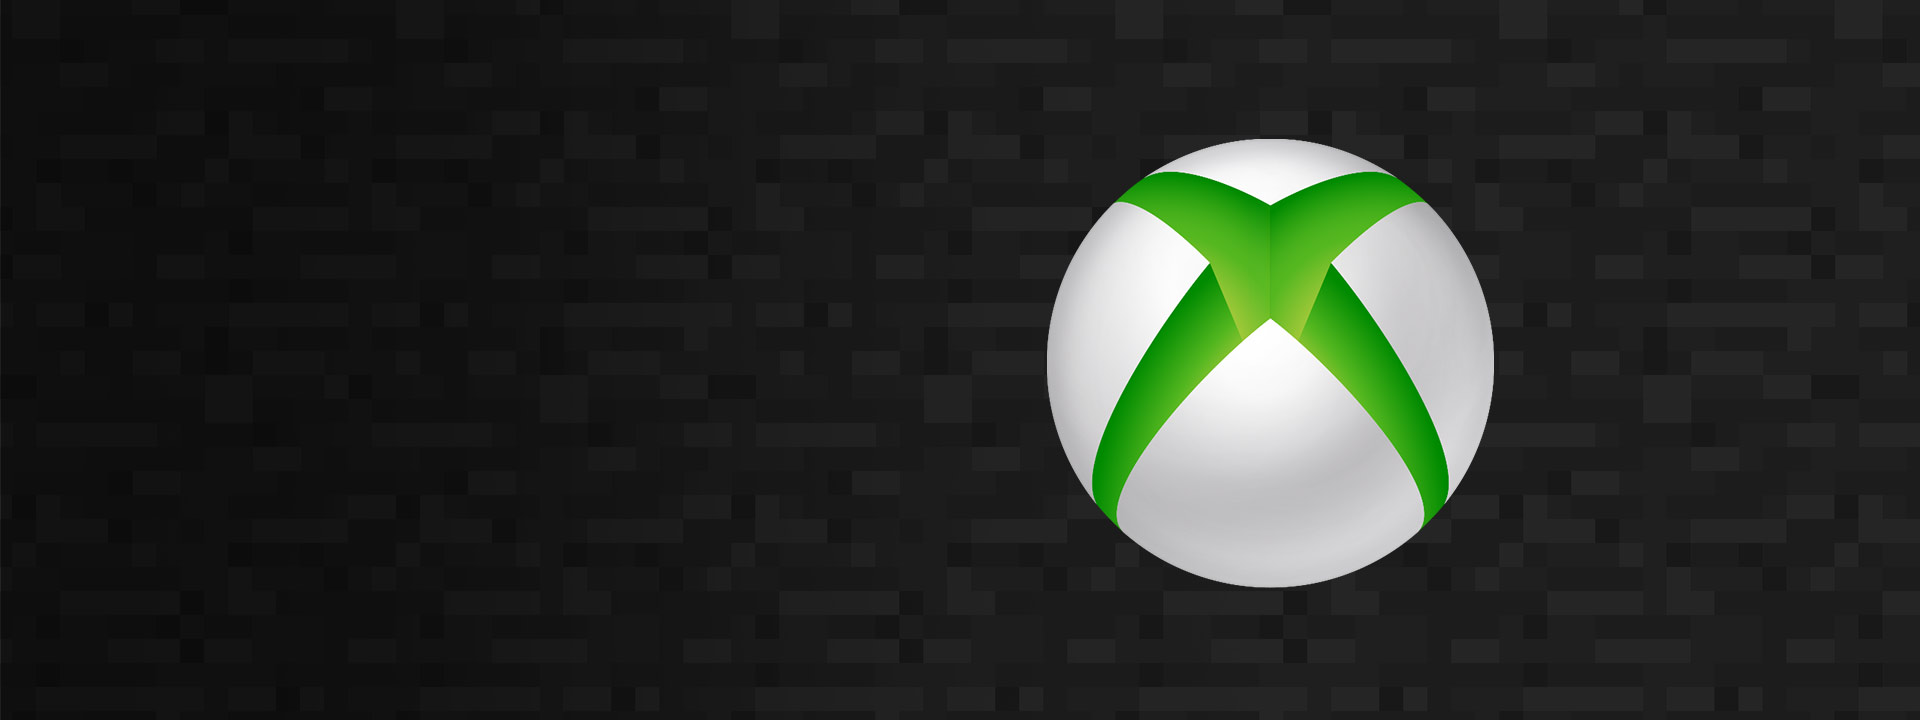 Games That Will be Shown During the Xbox Showcase